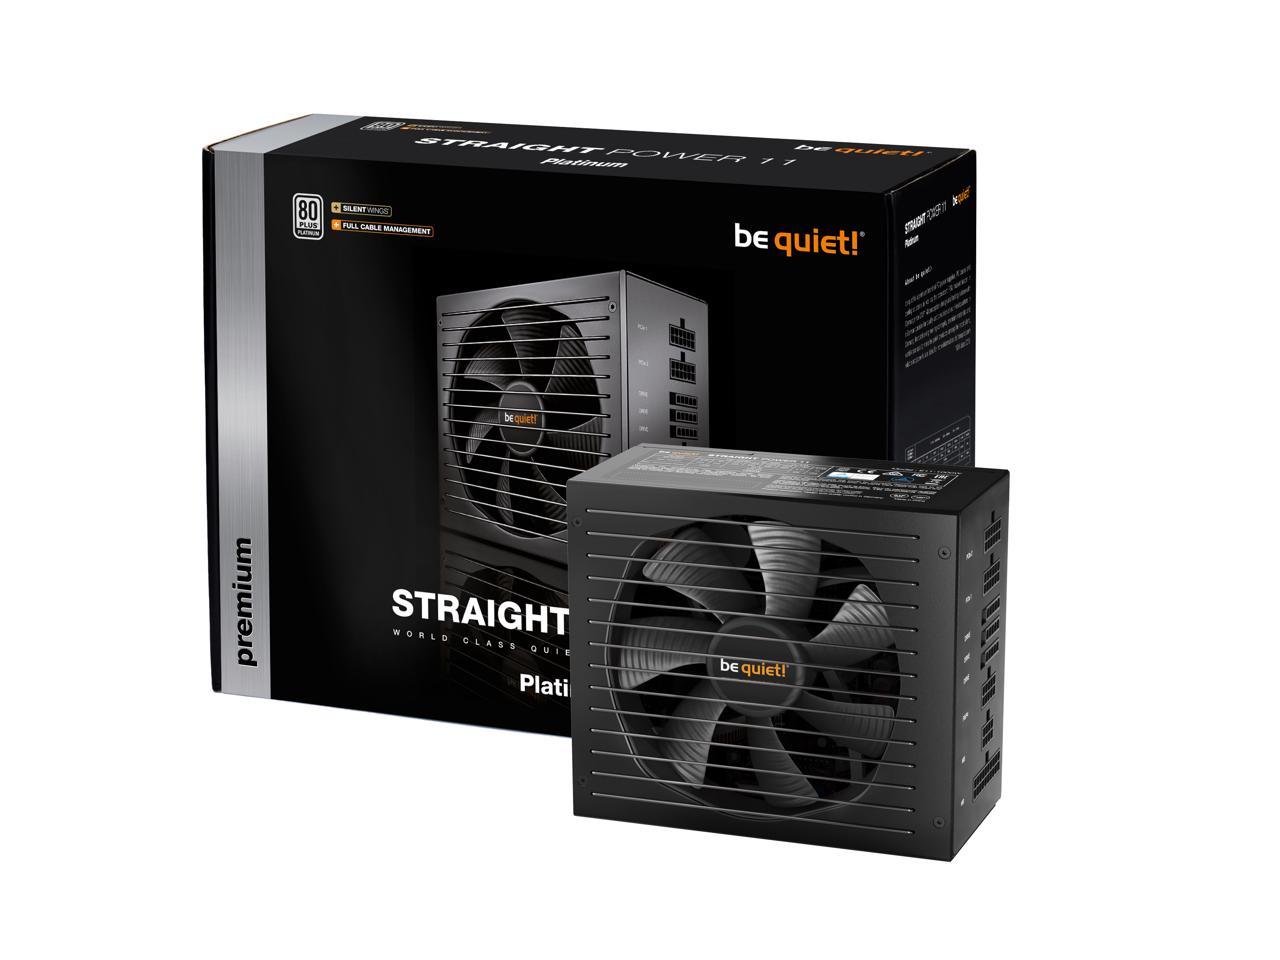 be quiet! Straight Power 11 750W Platinum, 80 PLUS Platinum efficiency, power supply, ATX, fully modular, virtually inaudible Silent Wings 3 135mm fan